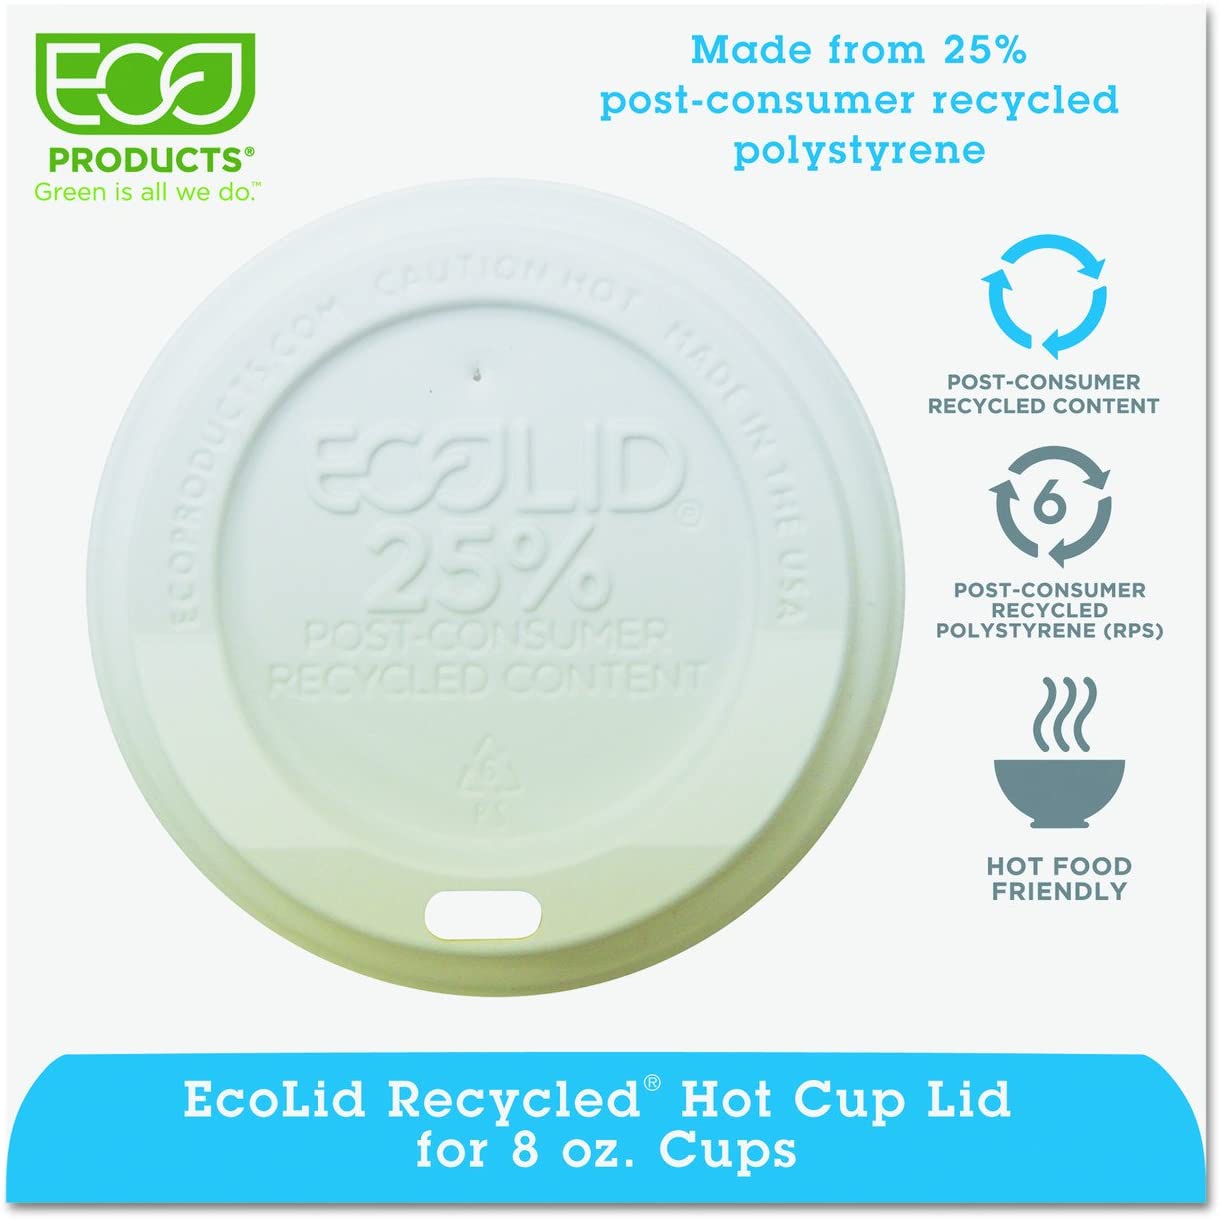 Eco-Products – EcoLid 25% Recycled Content White Hot Cup Lid – Fits 8oz Hot Cup – EP-HL8-WR (10 Packs of 100)